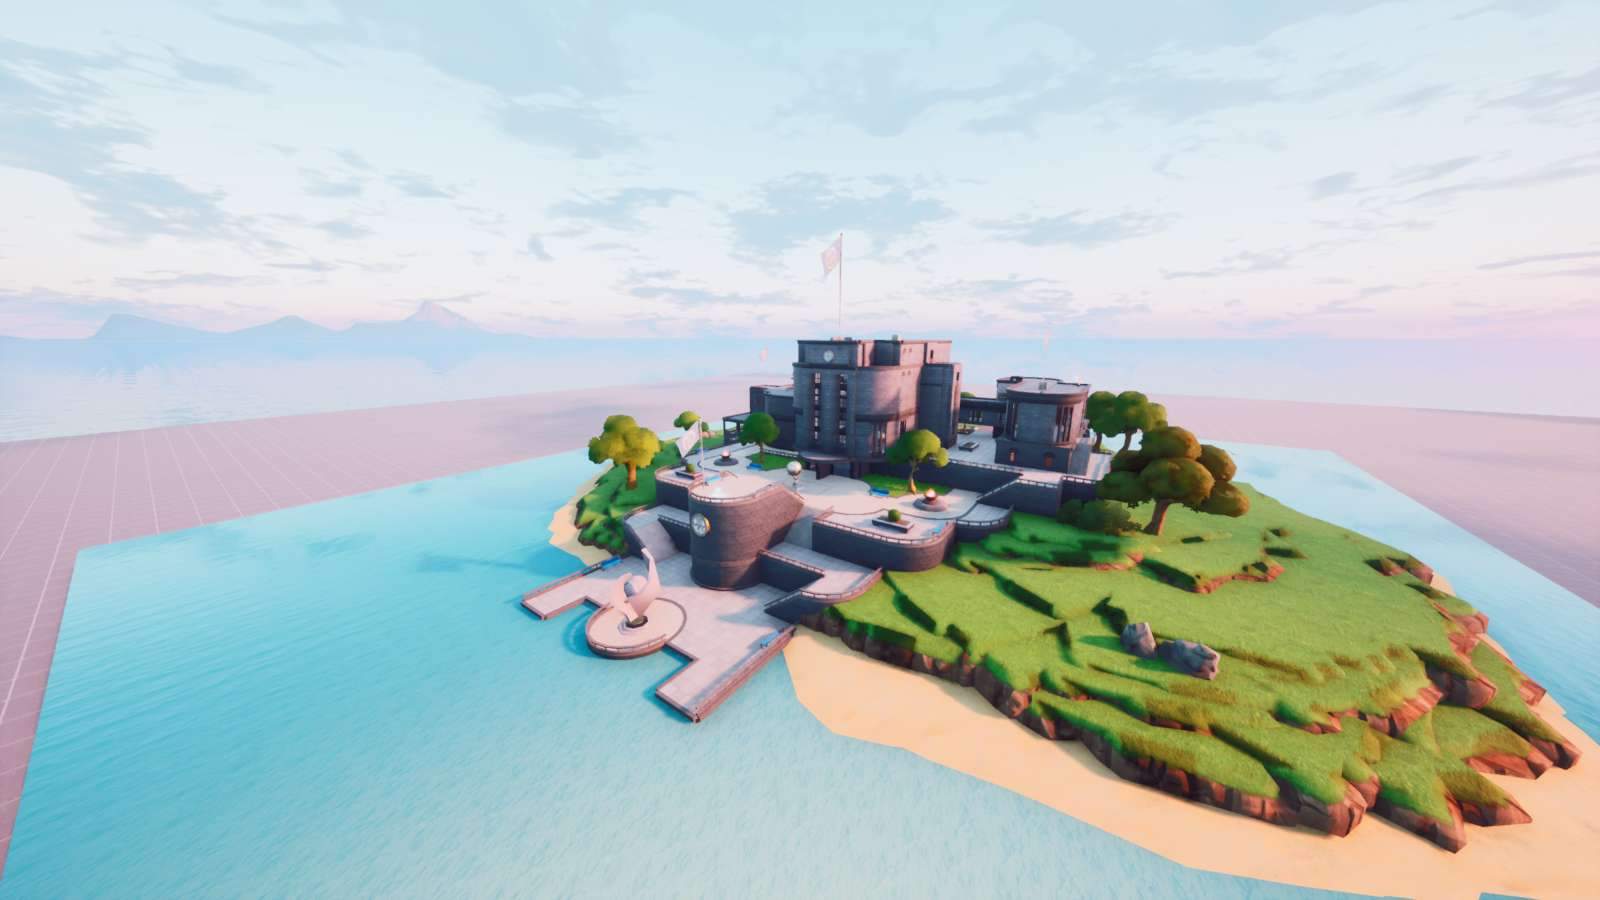 ☁ CLOUD - FREE FOR ALL [ spankysully ] – Fortnite Creative Map Code